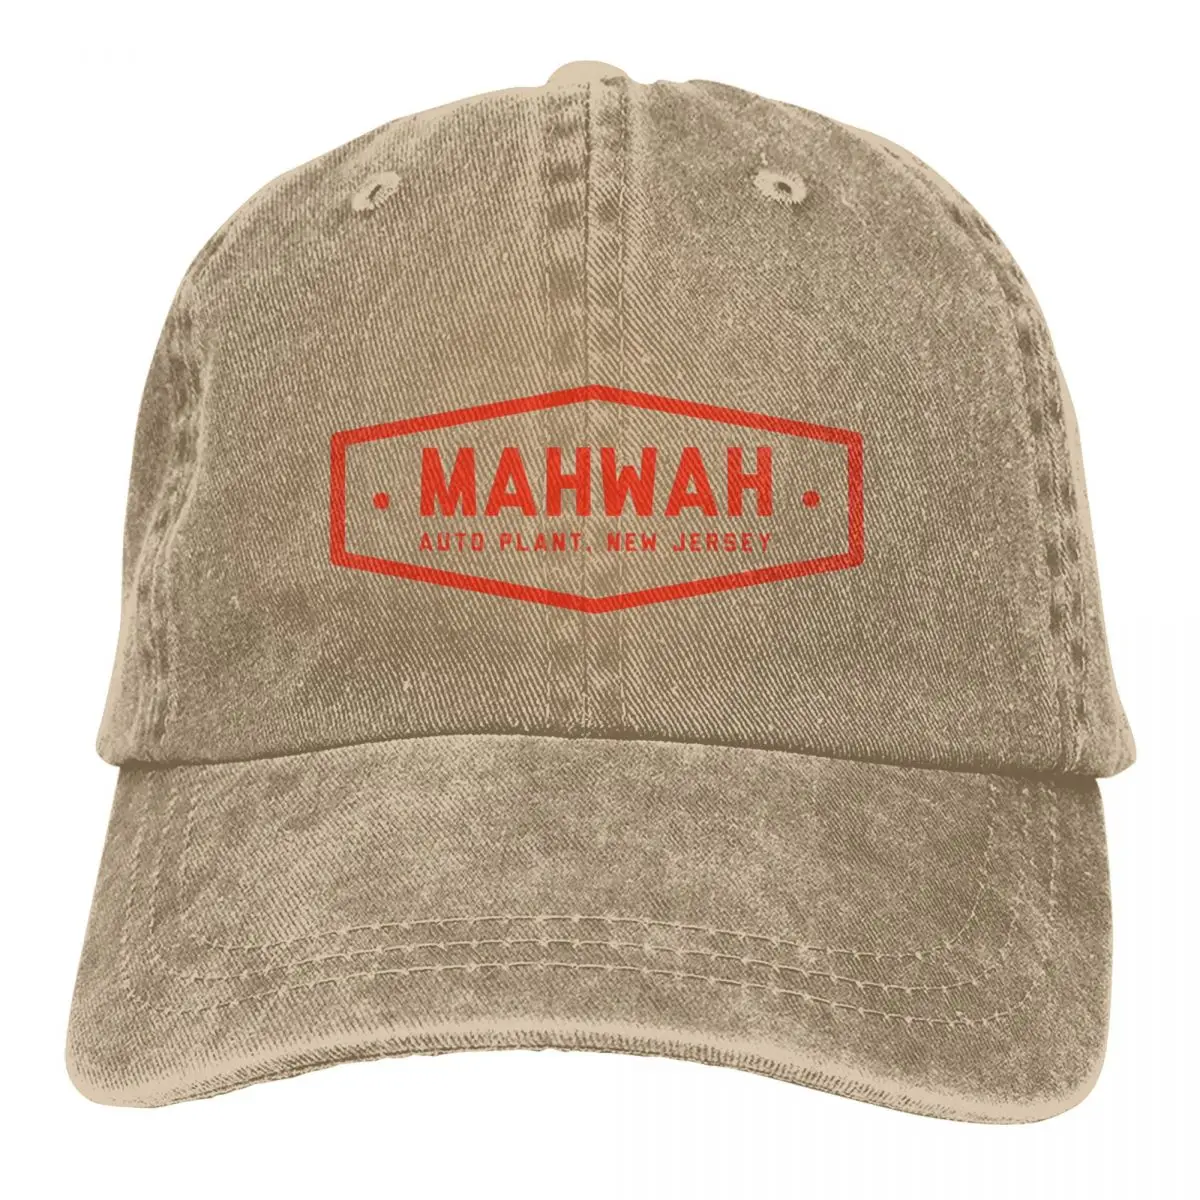 

Mahwah Auto Plant Outfit Men Women Trucker Hat Vintage Distressed Washed Caps Hat Vintage Outdoor Workouts Snapback Hat